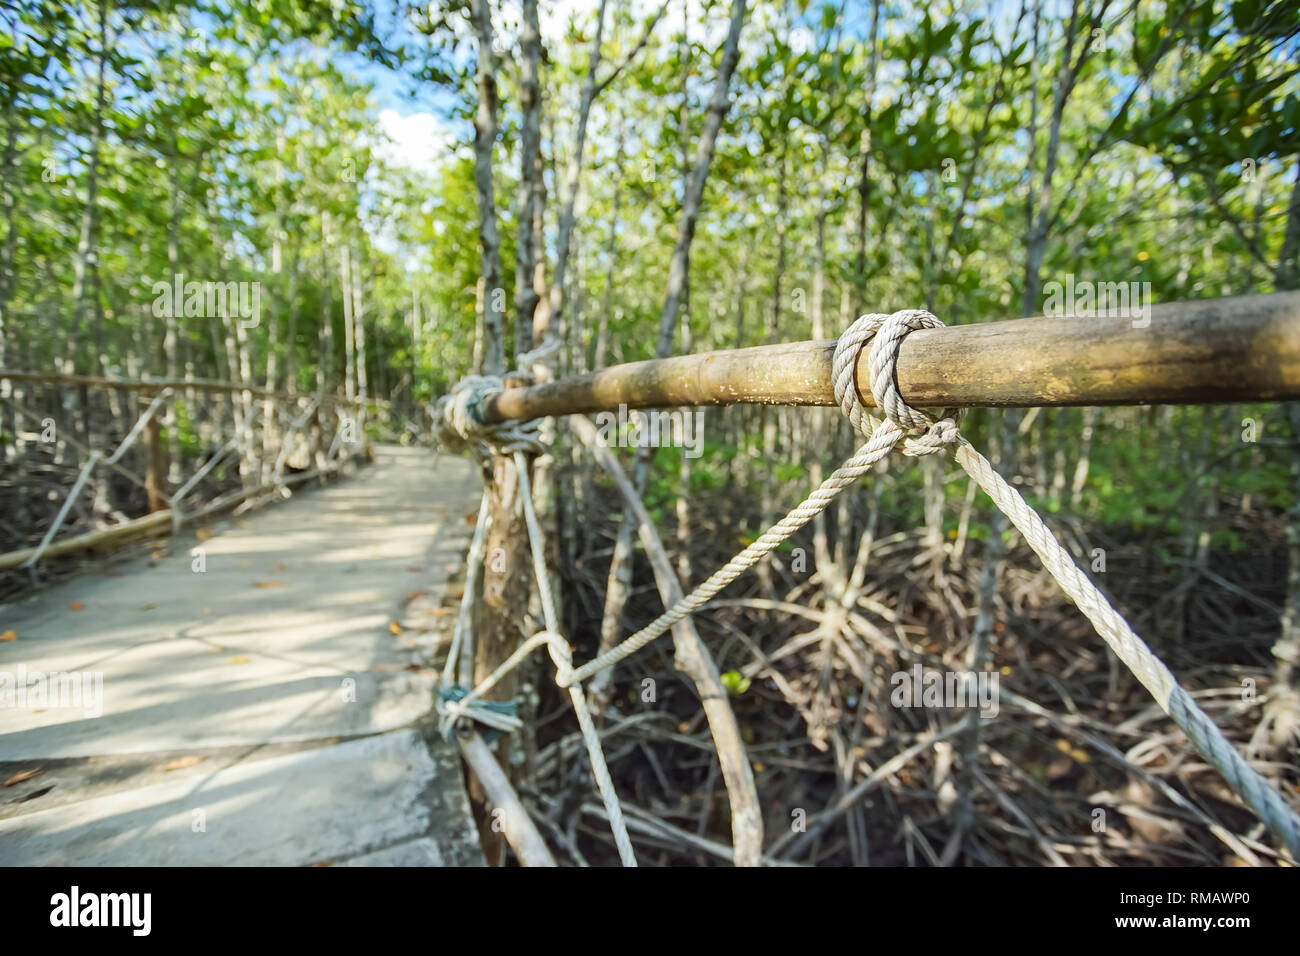 Mangrove forest education walkway in Trad province, Thailand. Stock Photo